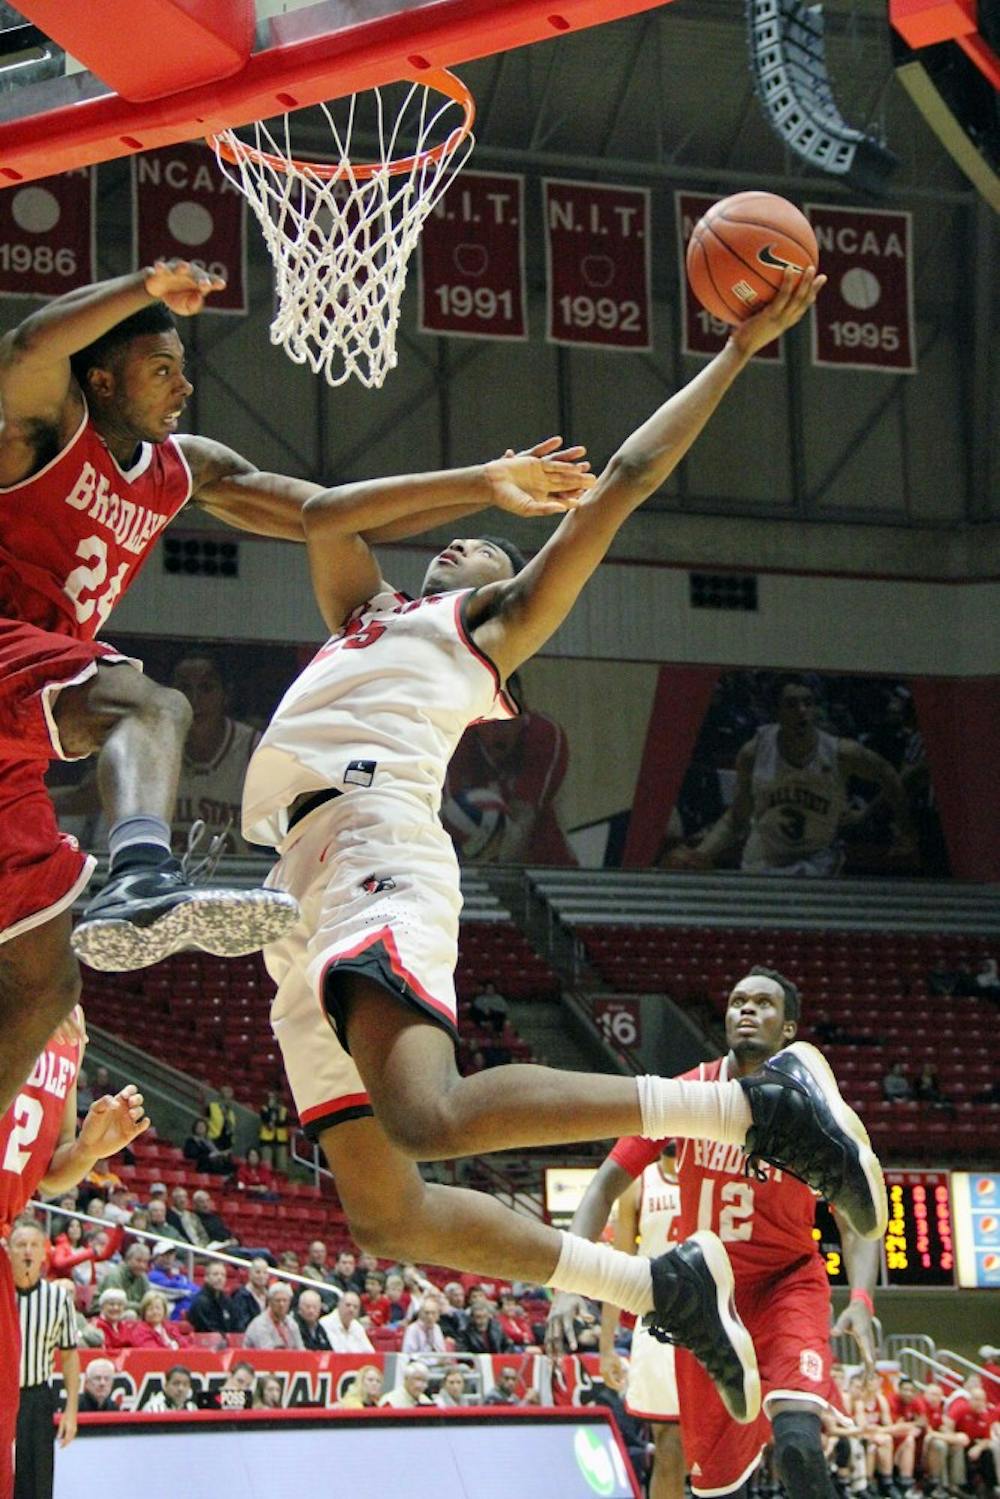 <p>Forward Tahjai Teague goes up for a shot and is defended by Bradley’s Jojo McGlaston during the Cardinals’ game against the Braves in 2016 in Worthen Arena. Ball State will host Saint Francis for an exhibition game on Nov. 6. Paige Grider, DN File</p>